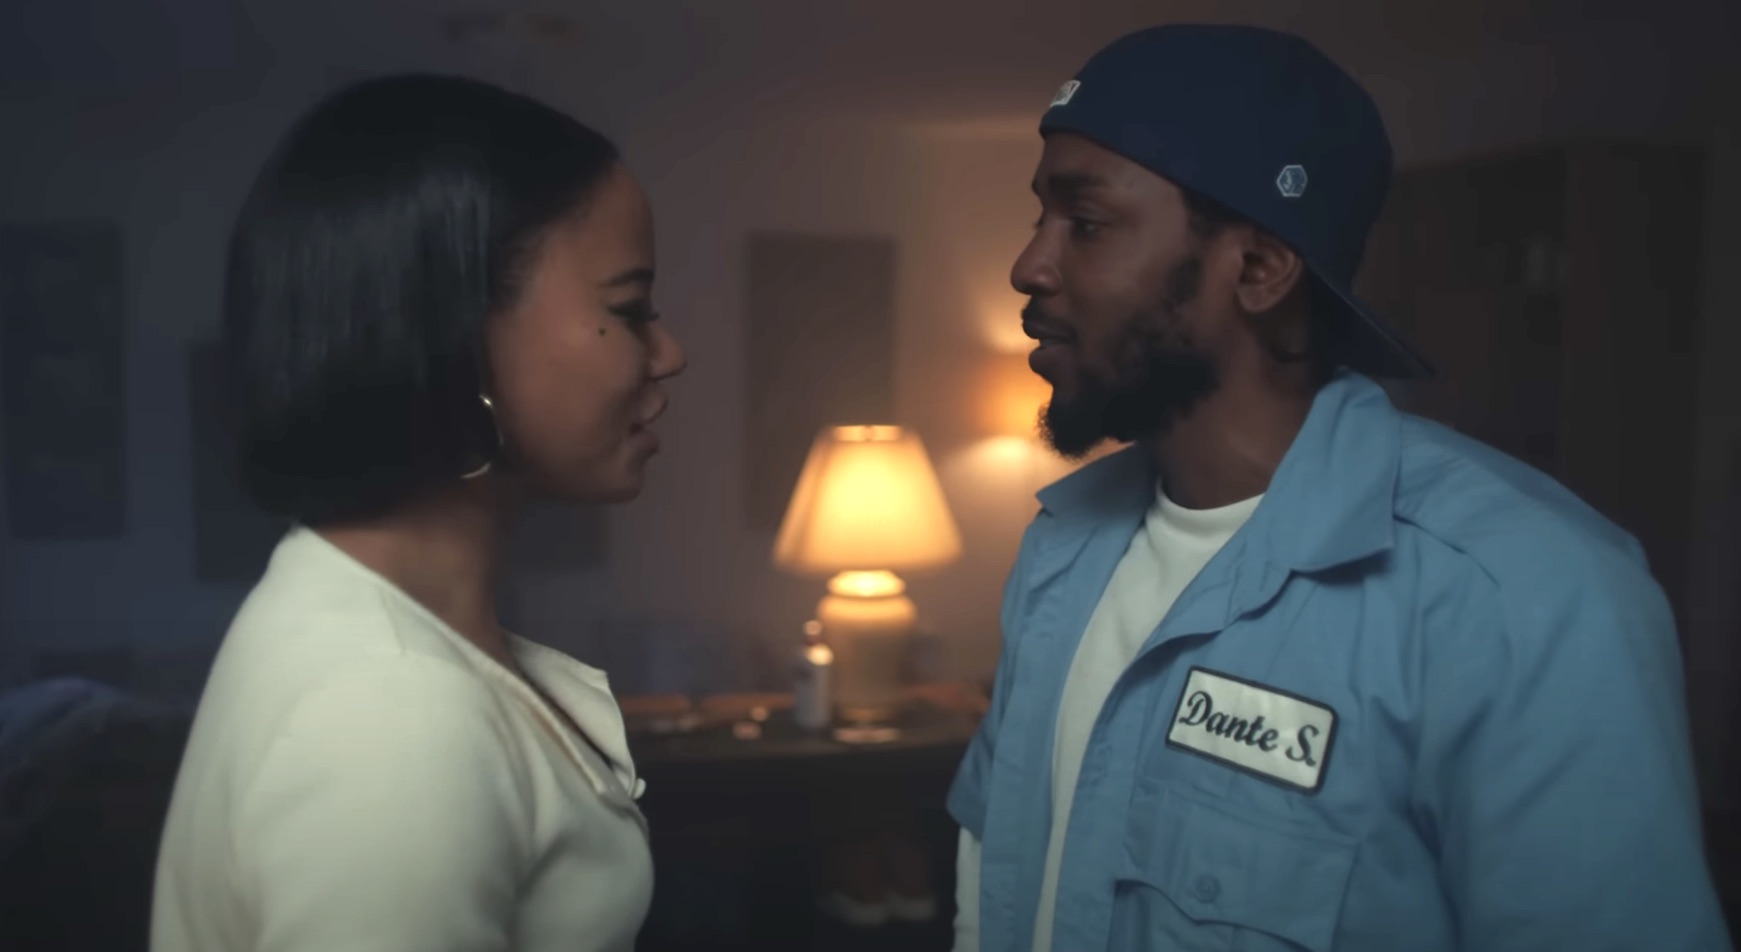 Kendrick Lamar's “ELEMENT.” video is the subject of a new